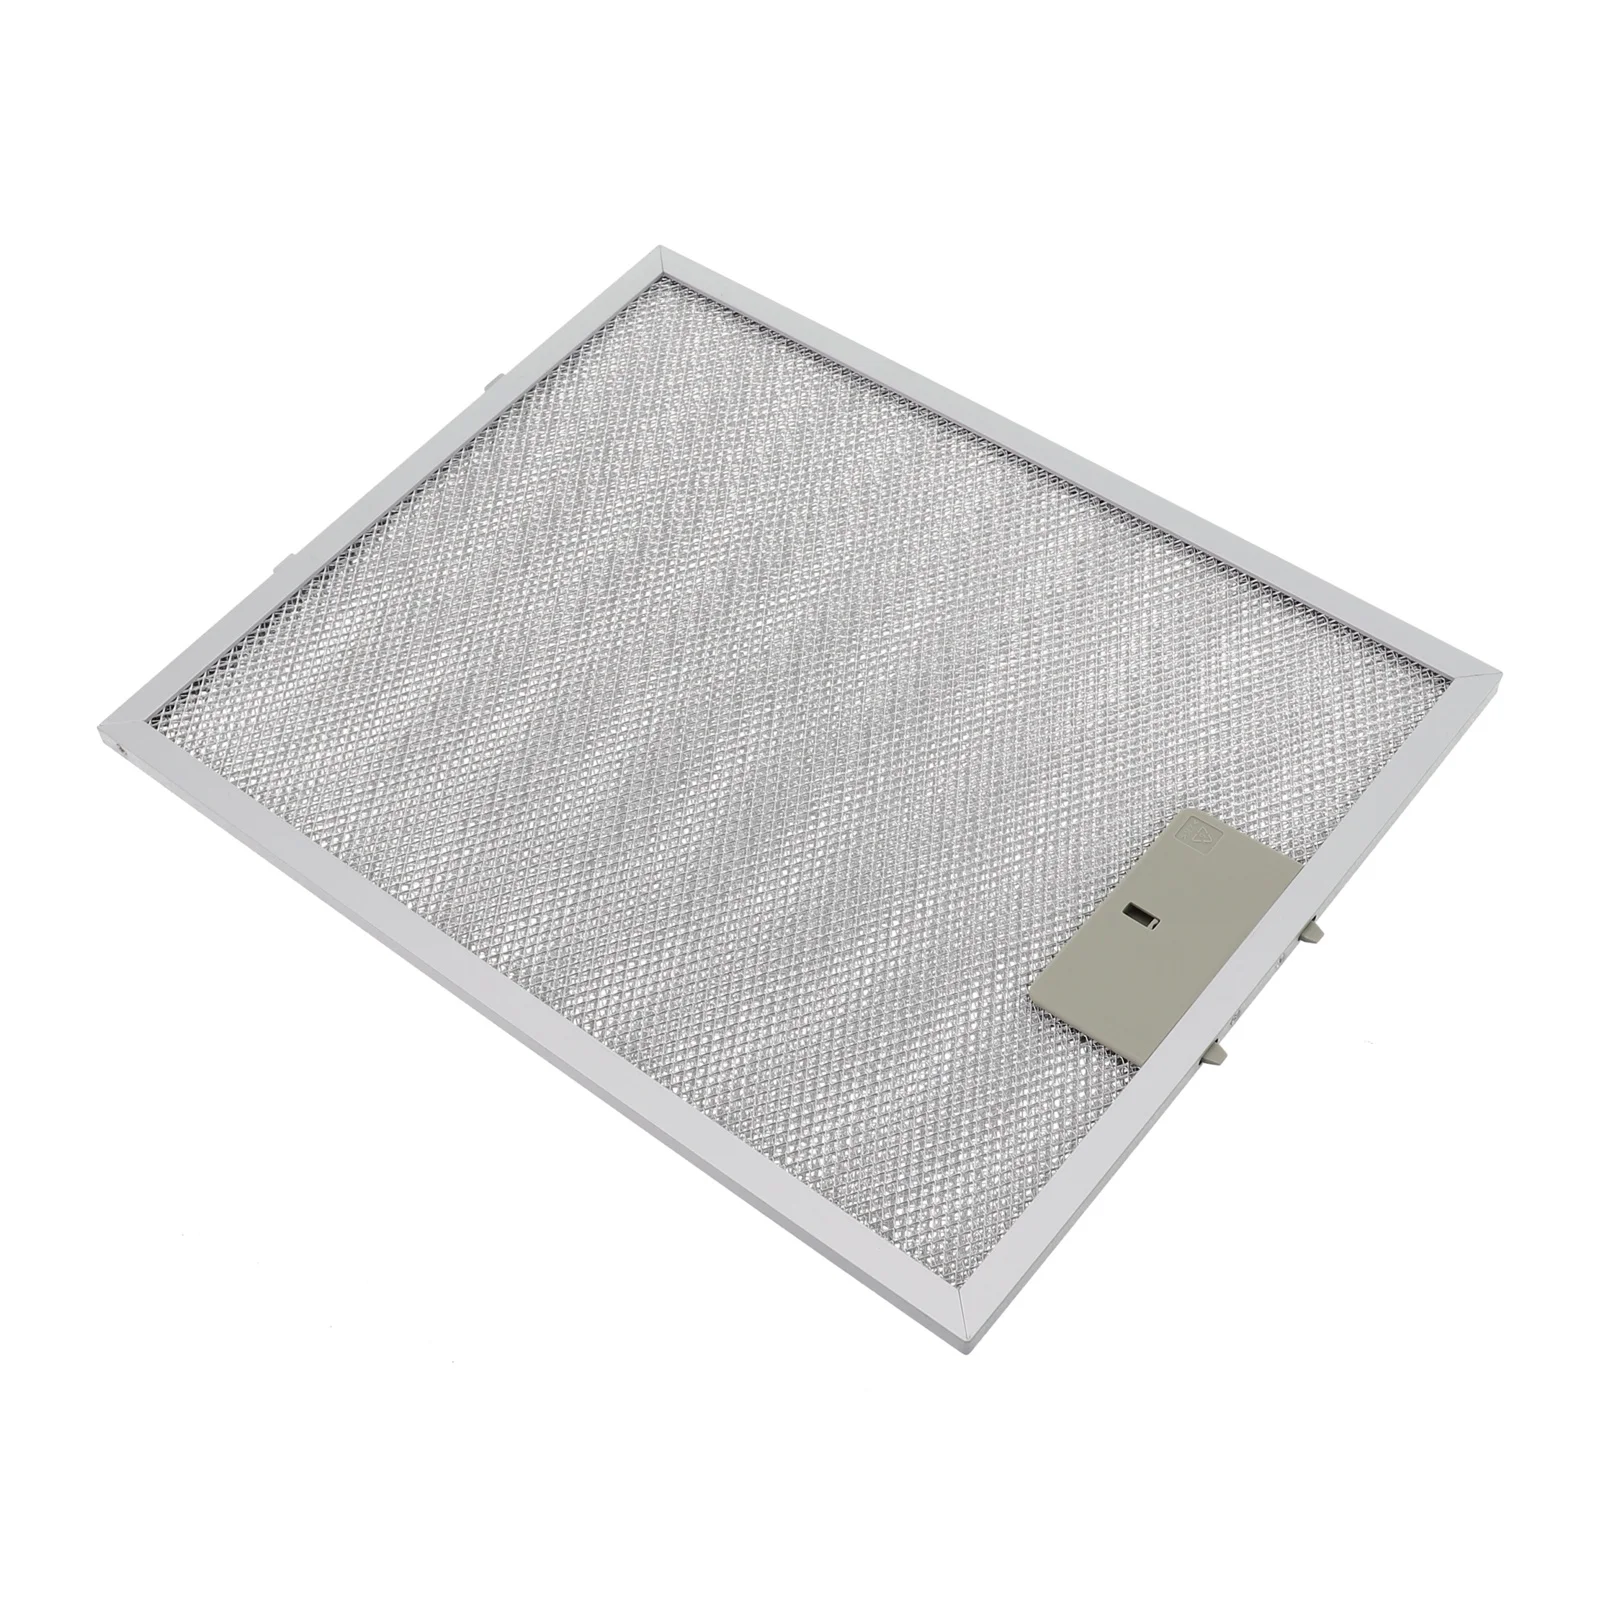 

Range Hood Accessories Stainless Steel Oil Baffle Filter 340x280x9mm High Filtration Performance Long lasting Durability